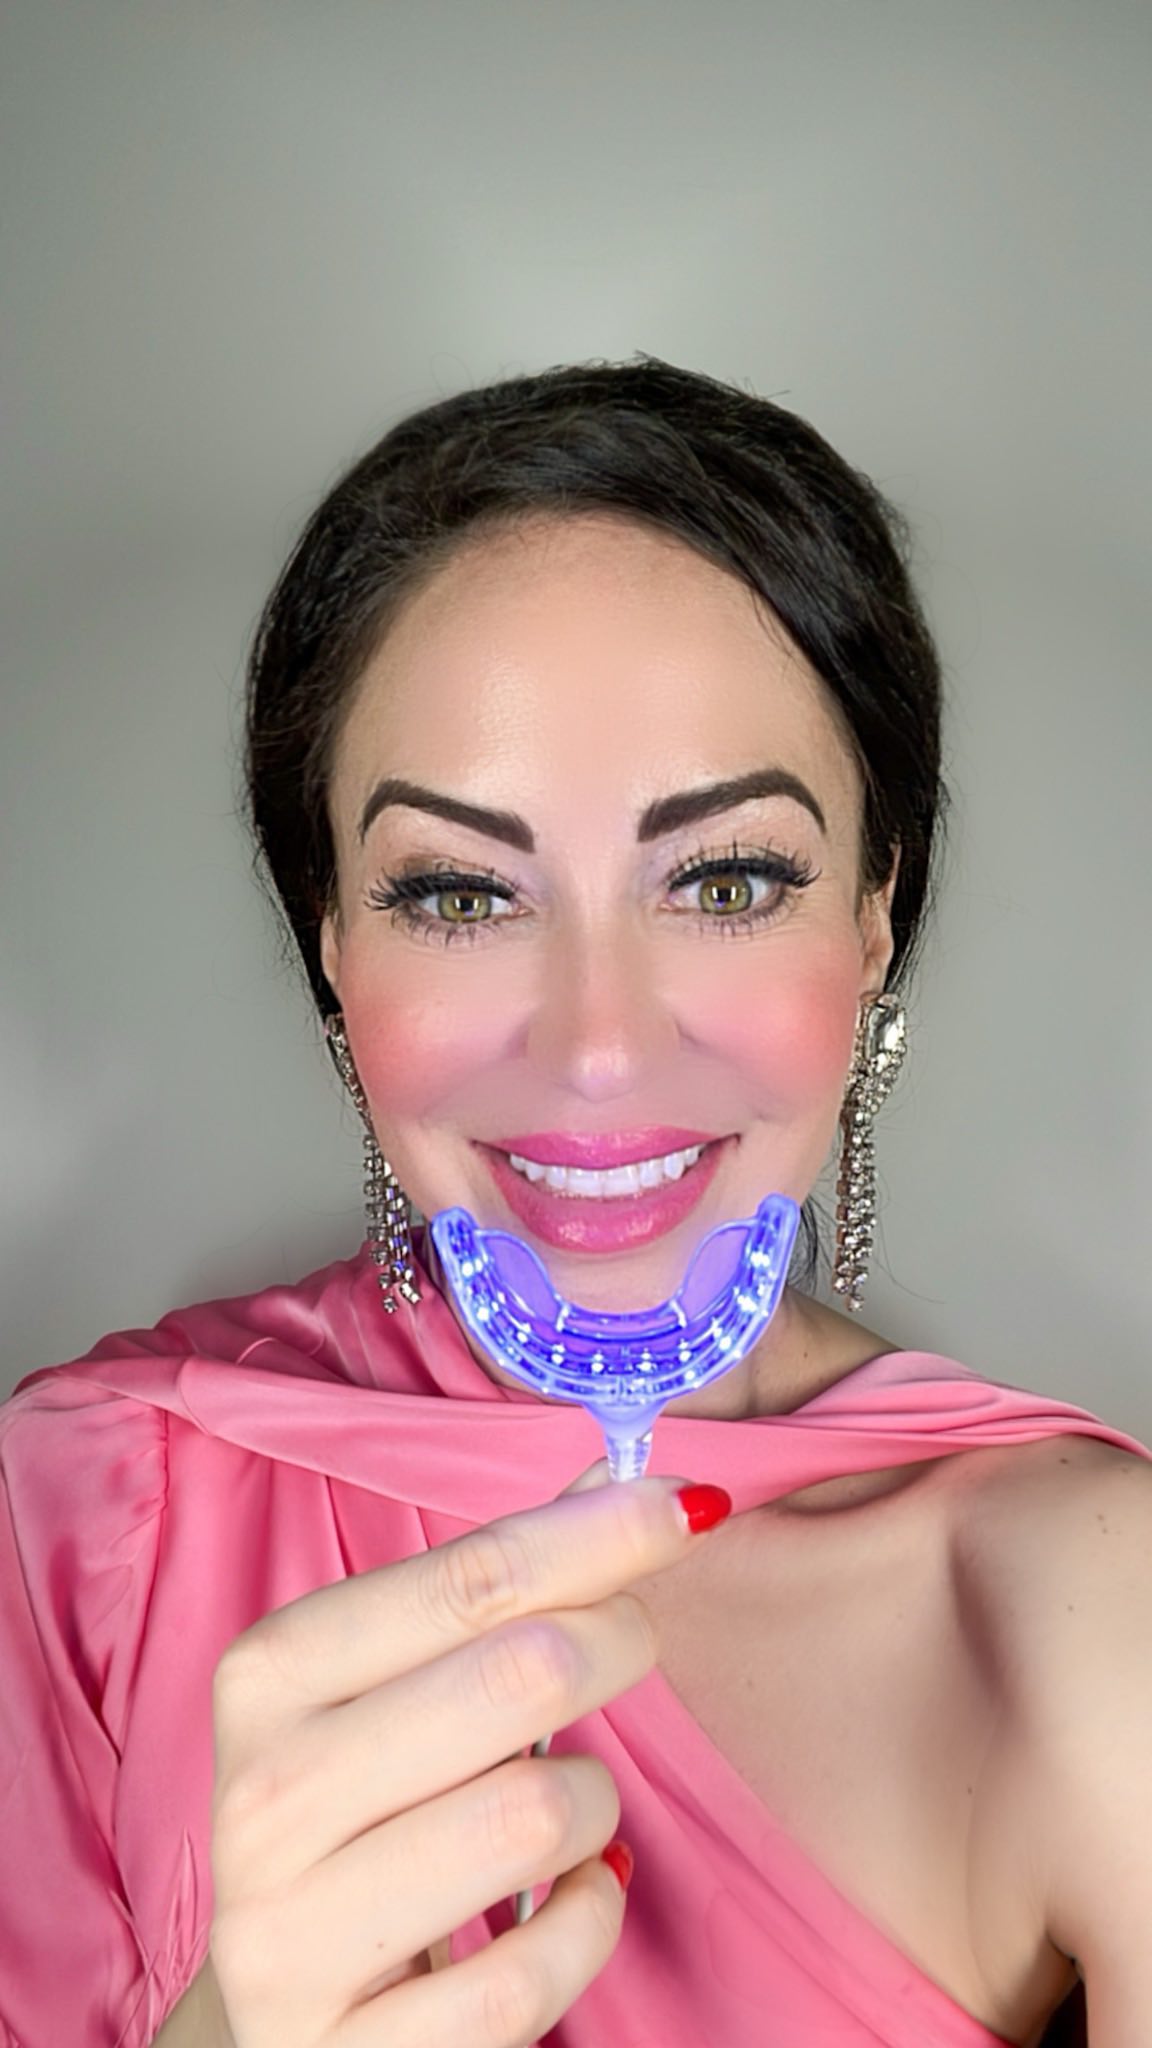 [ad] @gloscience - The only solution to all of your teeth whitening struggles! 🦷 [ad]

Before meeting world renowned dentist & prosthodontist @drjonlevine & his wife @staceyjanelevine May 19th, 2022 at their office on swanky UES office to learn more about Glo & try @gloscience I was truly skeptical. Through the years I have tried EVERY single at-home teeth whitening product on the market from my own dentist’s professional whitening trays to whitening strips from the drug store, whitening toothpaste & more. You name it and I have tried it! 

To my surprise not only was @gloscience begin easy to use but also I finally noticed a MARKED difference after only one use! Dr. Levine told me it is clinically proven to deliver a brighter smile when used 5 days total for a smile 5X brighter. GLO Brilliant is a dentist – invented teeth whitening device that combines patented illuminating heat technology with professionally formulated whitening gel to lift tough teeth stains and brighten smiles without sensitivity. It was NOT messy, nor painful but super easy to use. The mouthpiece uses patented light and heat technology to amplify whitening results, with a built-in timer, so you always get a perfect application. I actually stopped using it after only 3 days because I was already beyond pleased with the results! I seriously cannot believe it took me this long discover GLO! 

I actually had no idea what a big deal this family  was. Just about every celebrity under the book comes to Dr. Levine. Not only were they kind, genuine and extremely professional but with all of their success they have made sure to give back! It is FDA registered and is proud to donate 10% of all profits to the @glogoodfoundation to provide free dental care to those in need. 

Do yourself a favor and order yours today from retailers like Sephora, Bloomingdales & more to enjoy whiter teeth in just 5 days! 
#gloscience #teethwhitening #dentist #teethcleaning [ad]